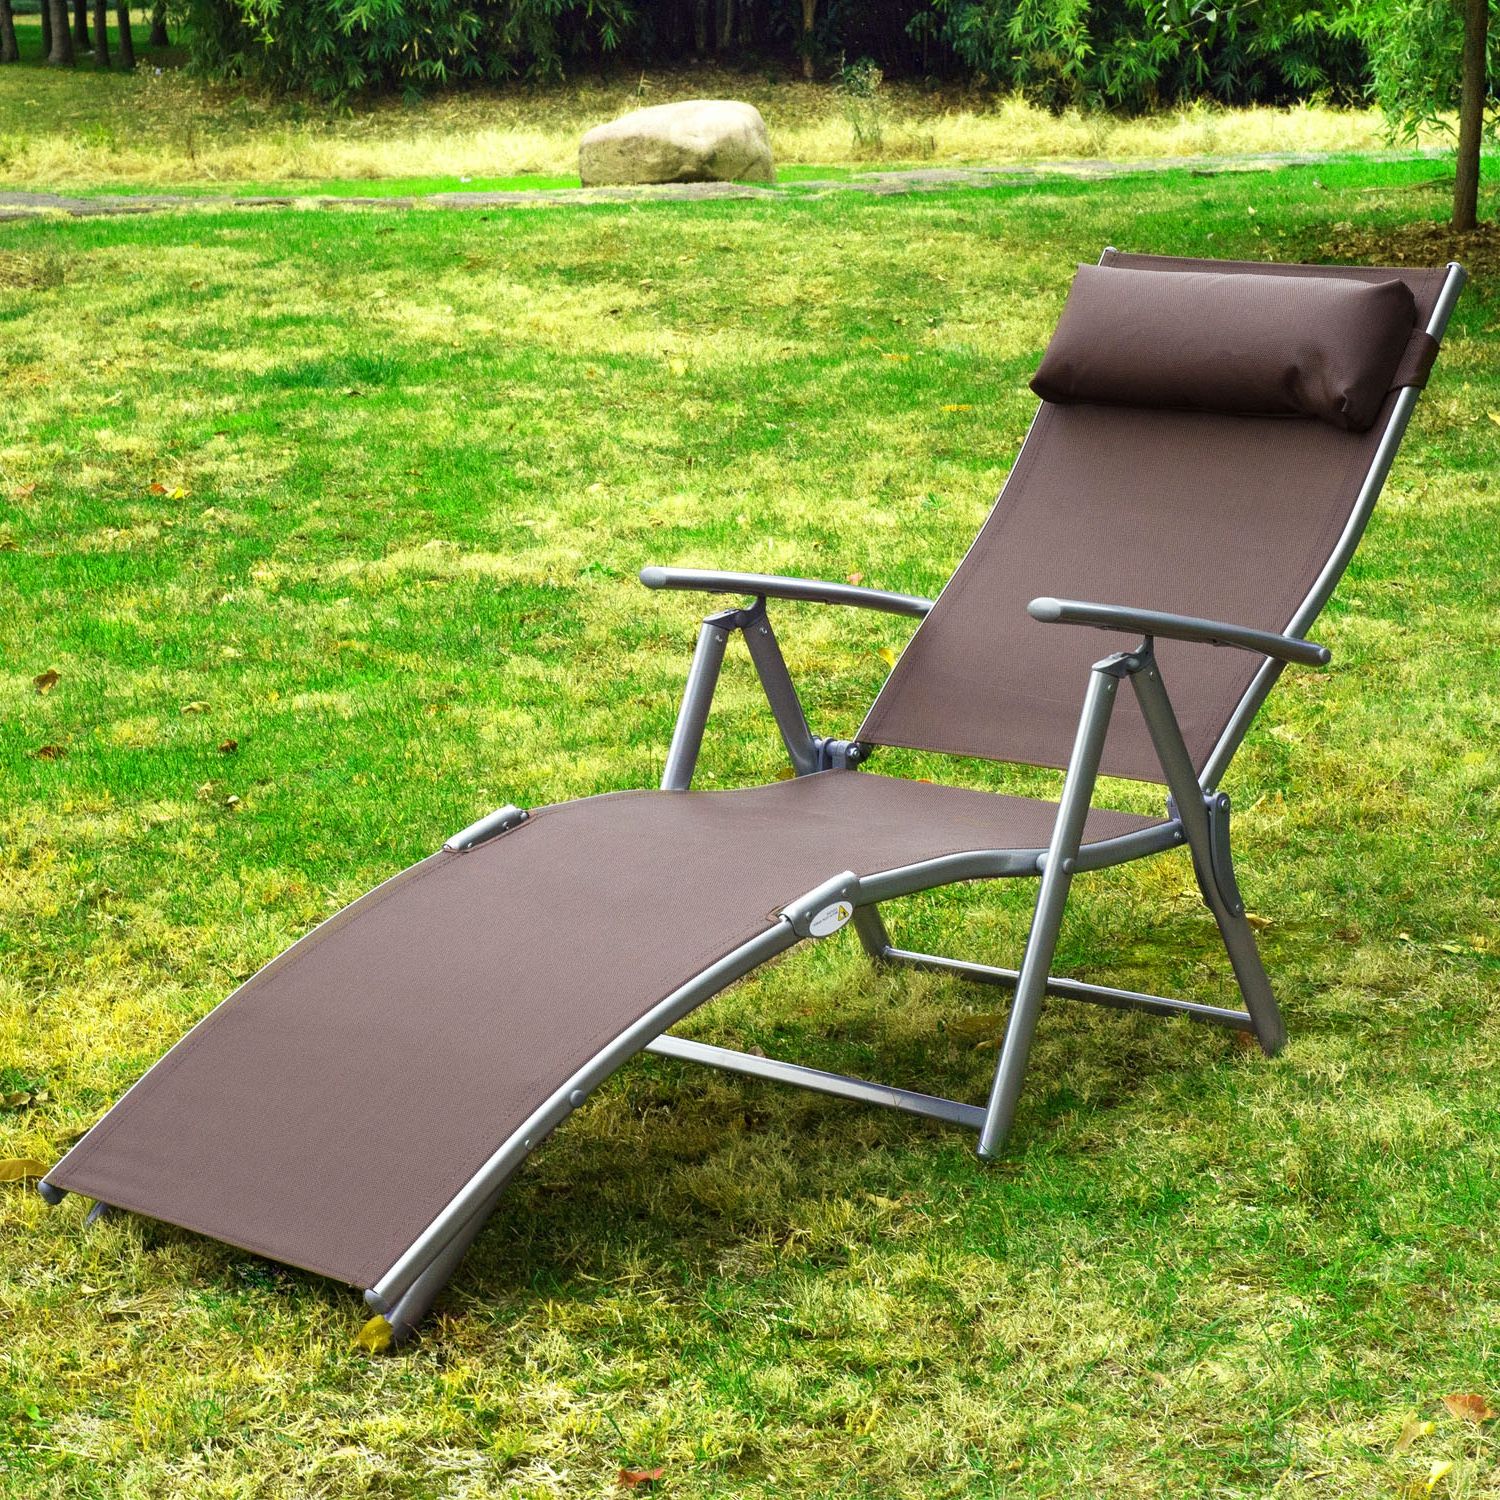 Outsunny Heavy Duty Adjustable Folding Reclining Chair Outdoor Sun Throughout Newest Adjustable Outdoor Lounger Chairs (View 4 of 15)